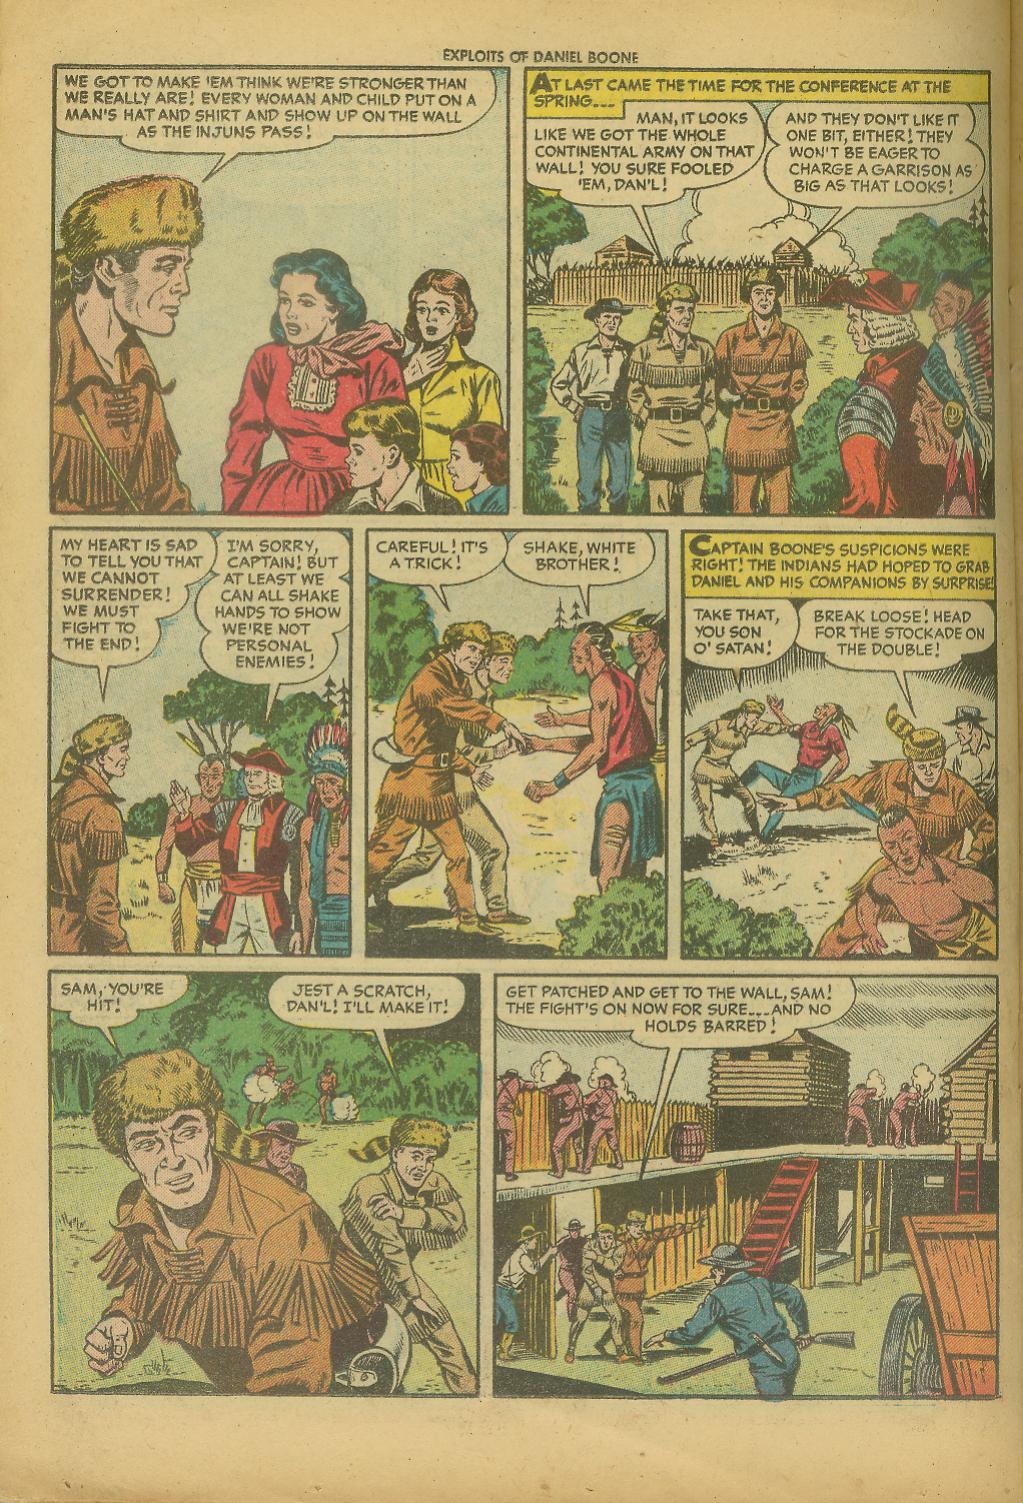 Read online Exploits of Daniel Boone comic -  Issue #1 - 22